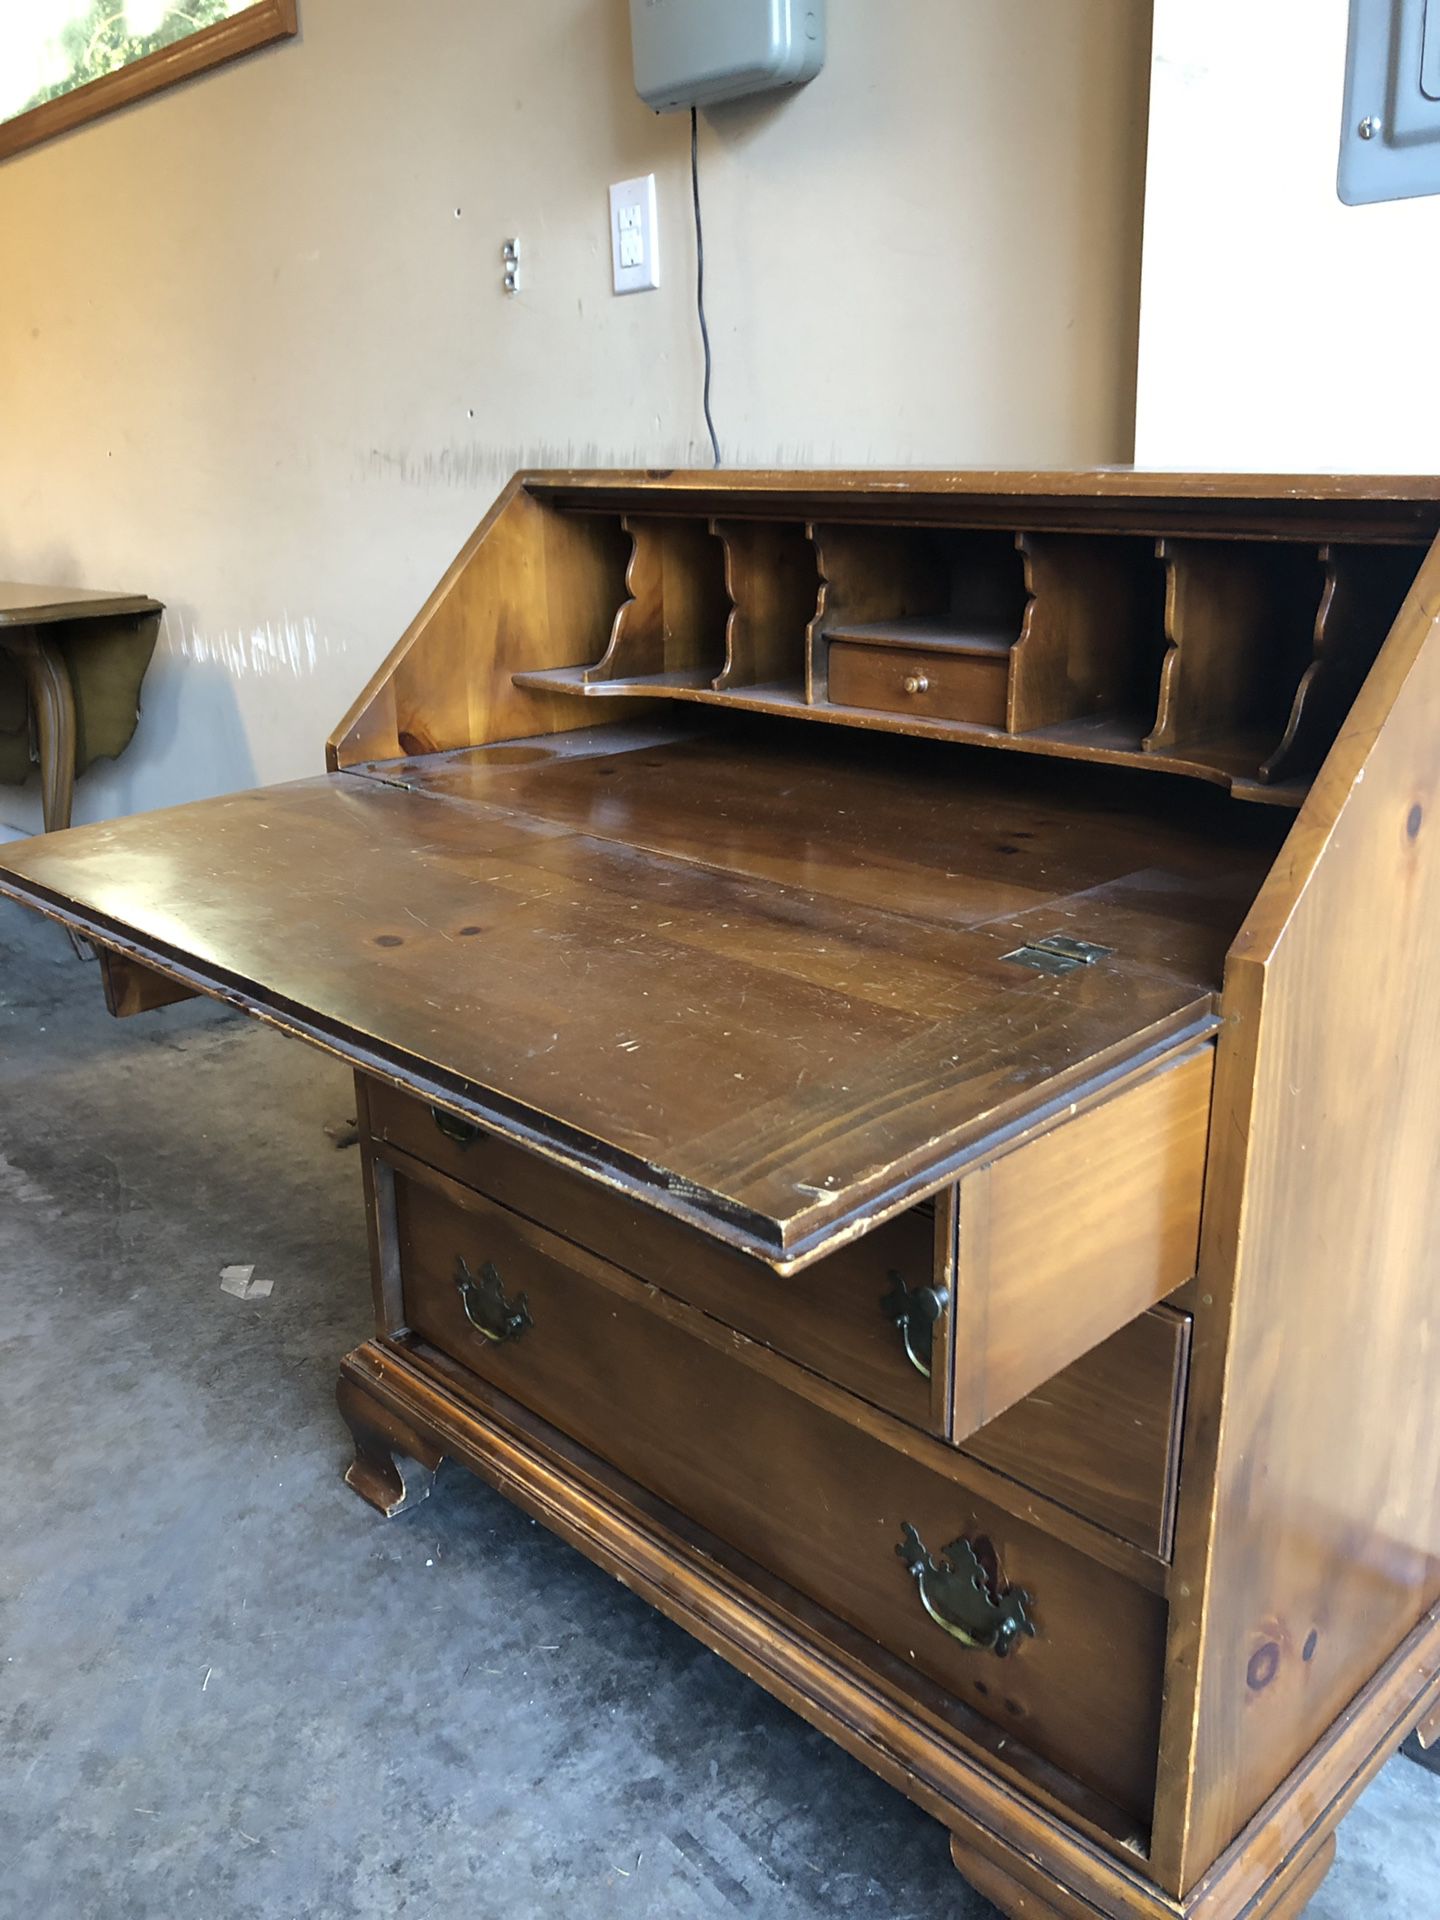 Vintage Secretary Desk. 18” deep, 38” tall, 34” wide. Three drawers and fold down desk. Great for small spaces.